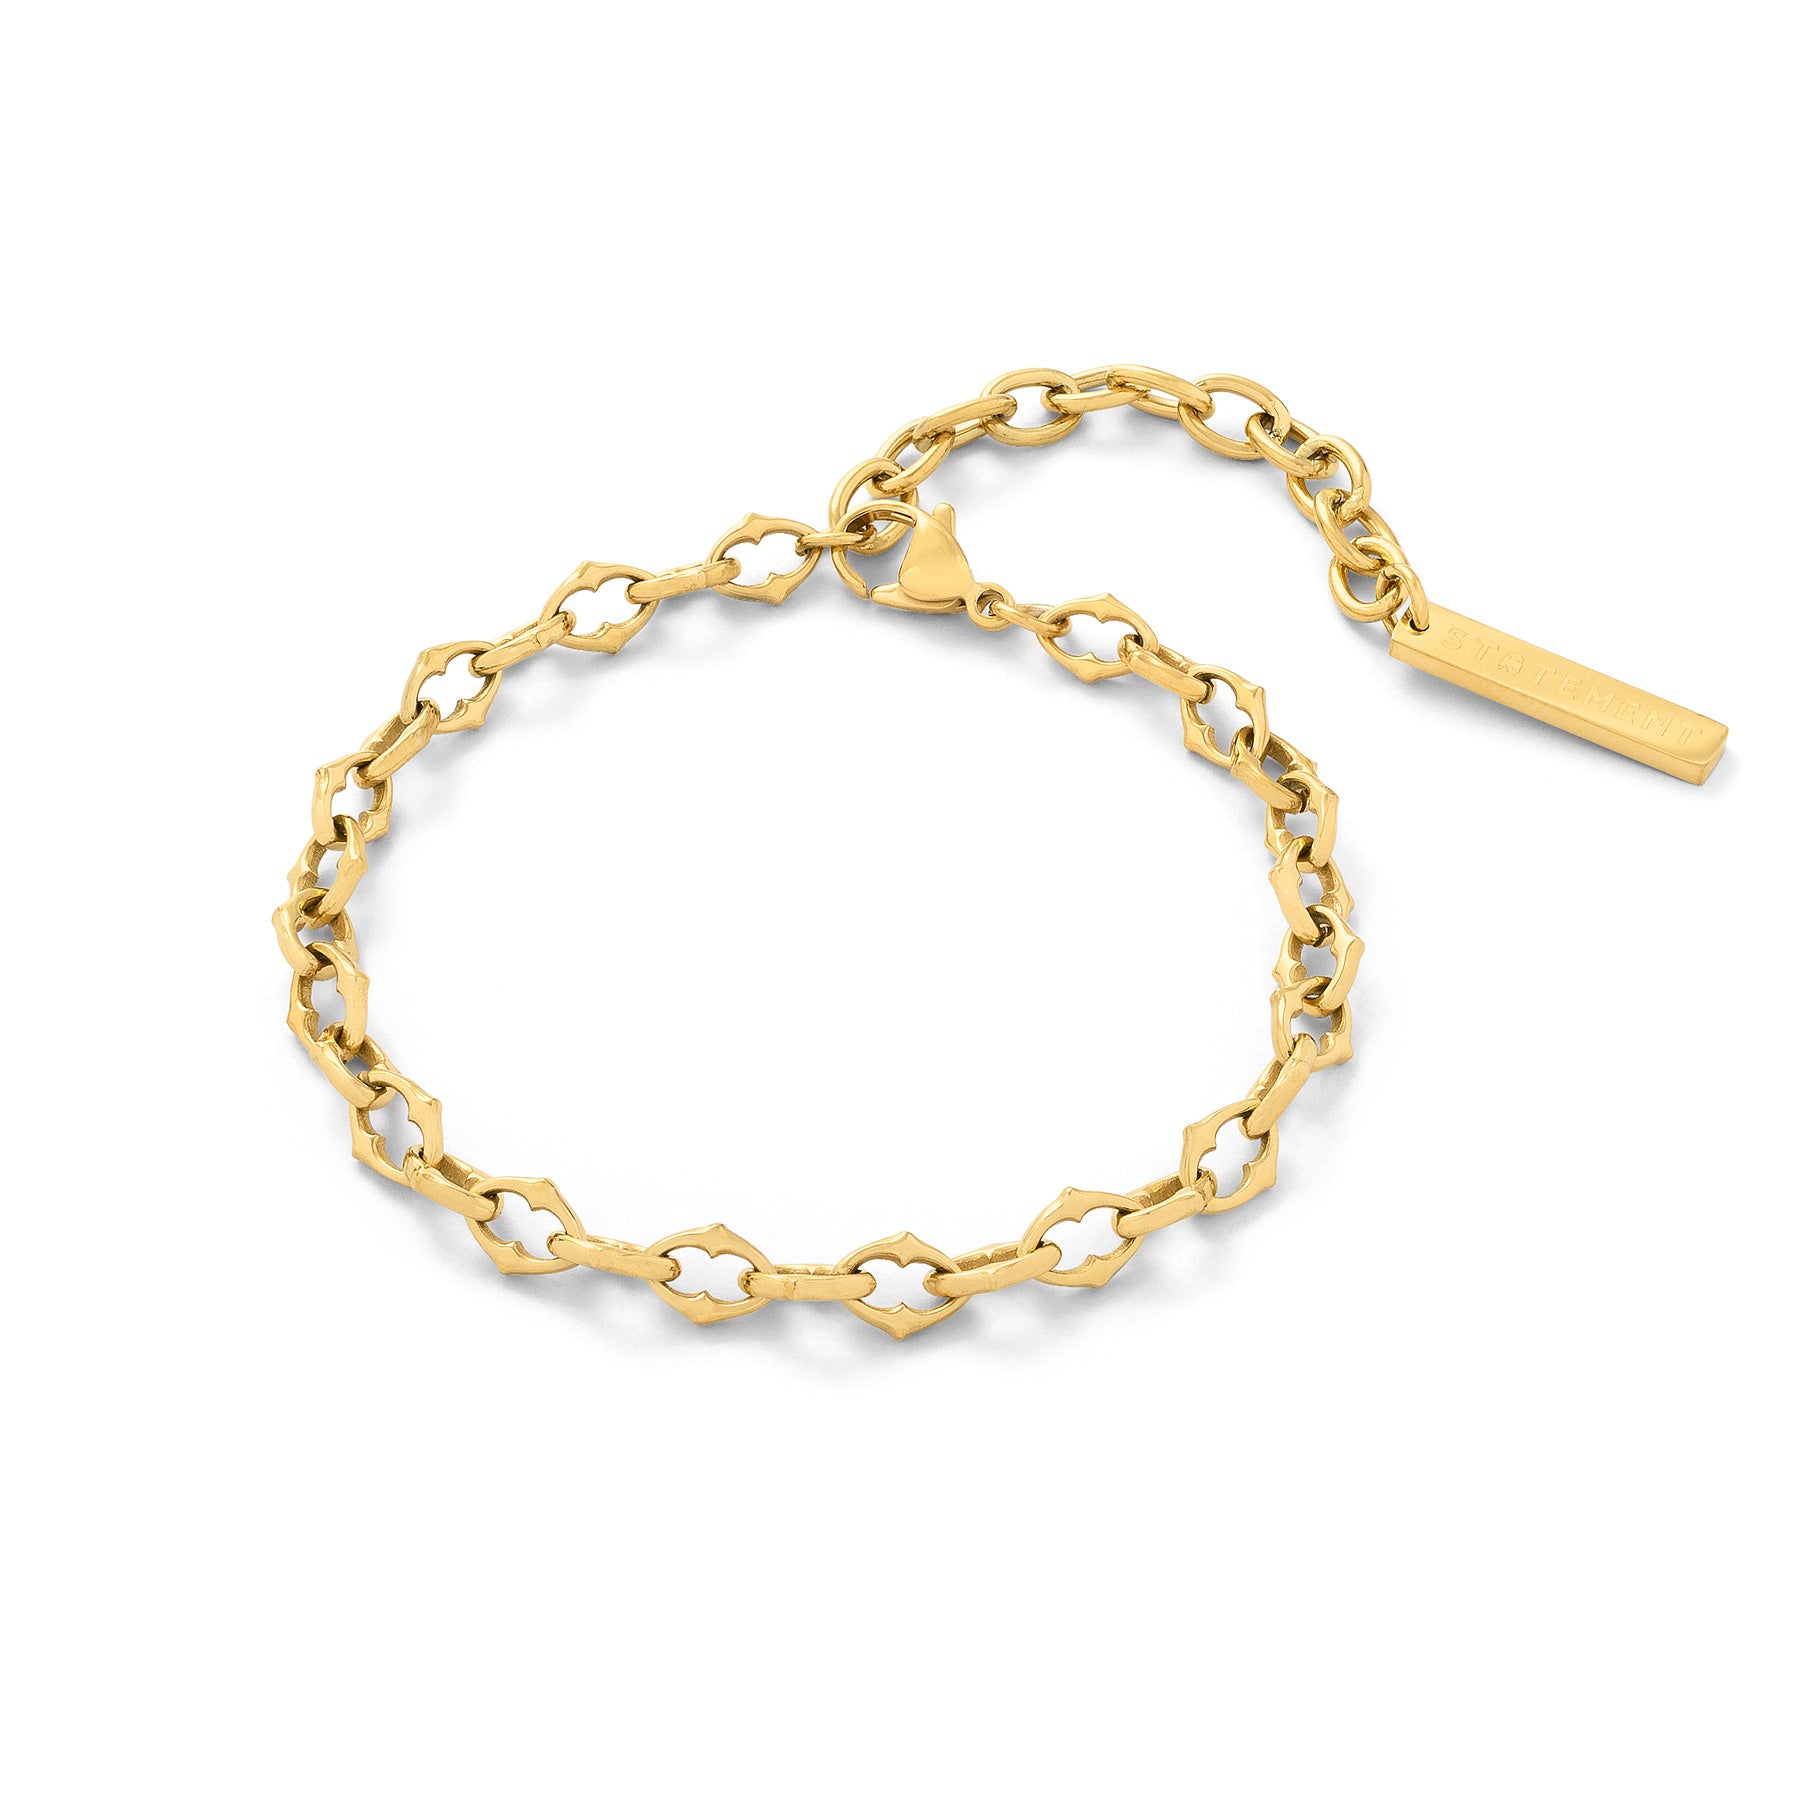 Gold spiked chain bracelet on white